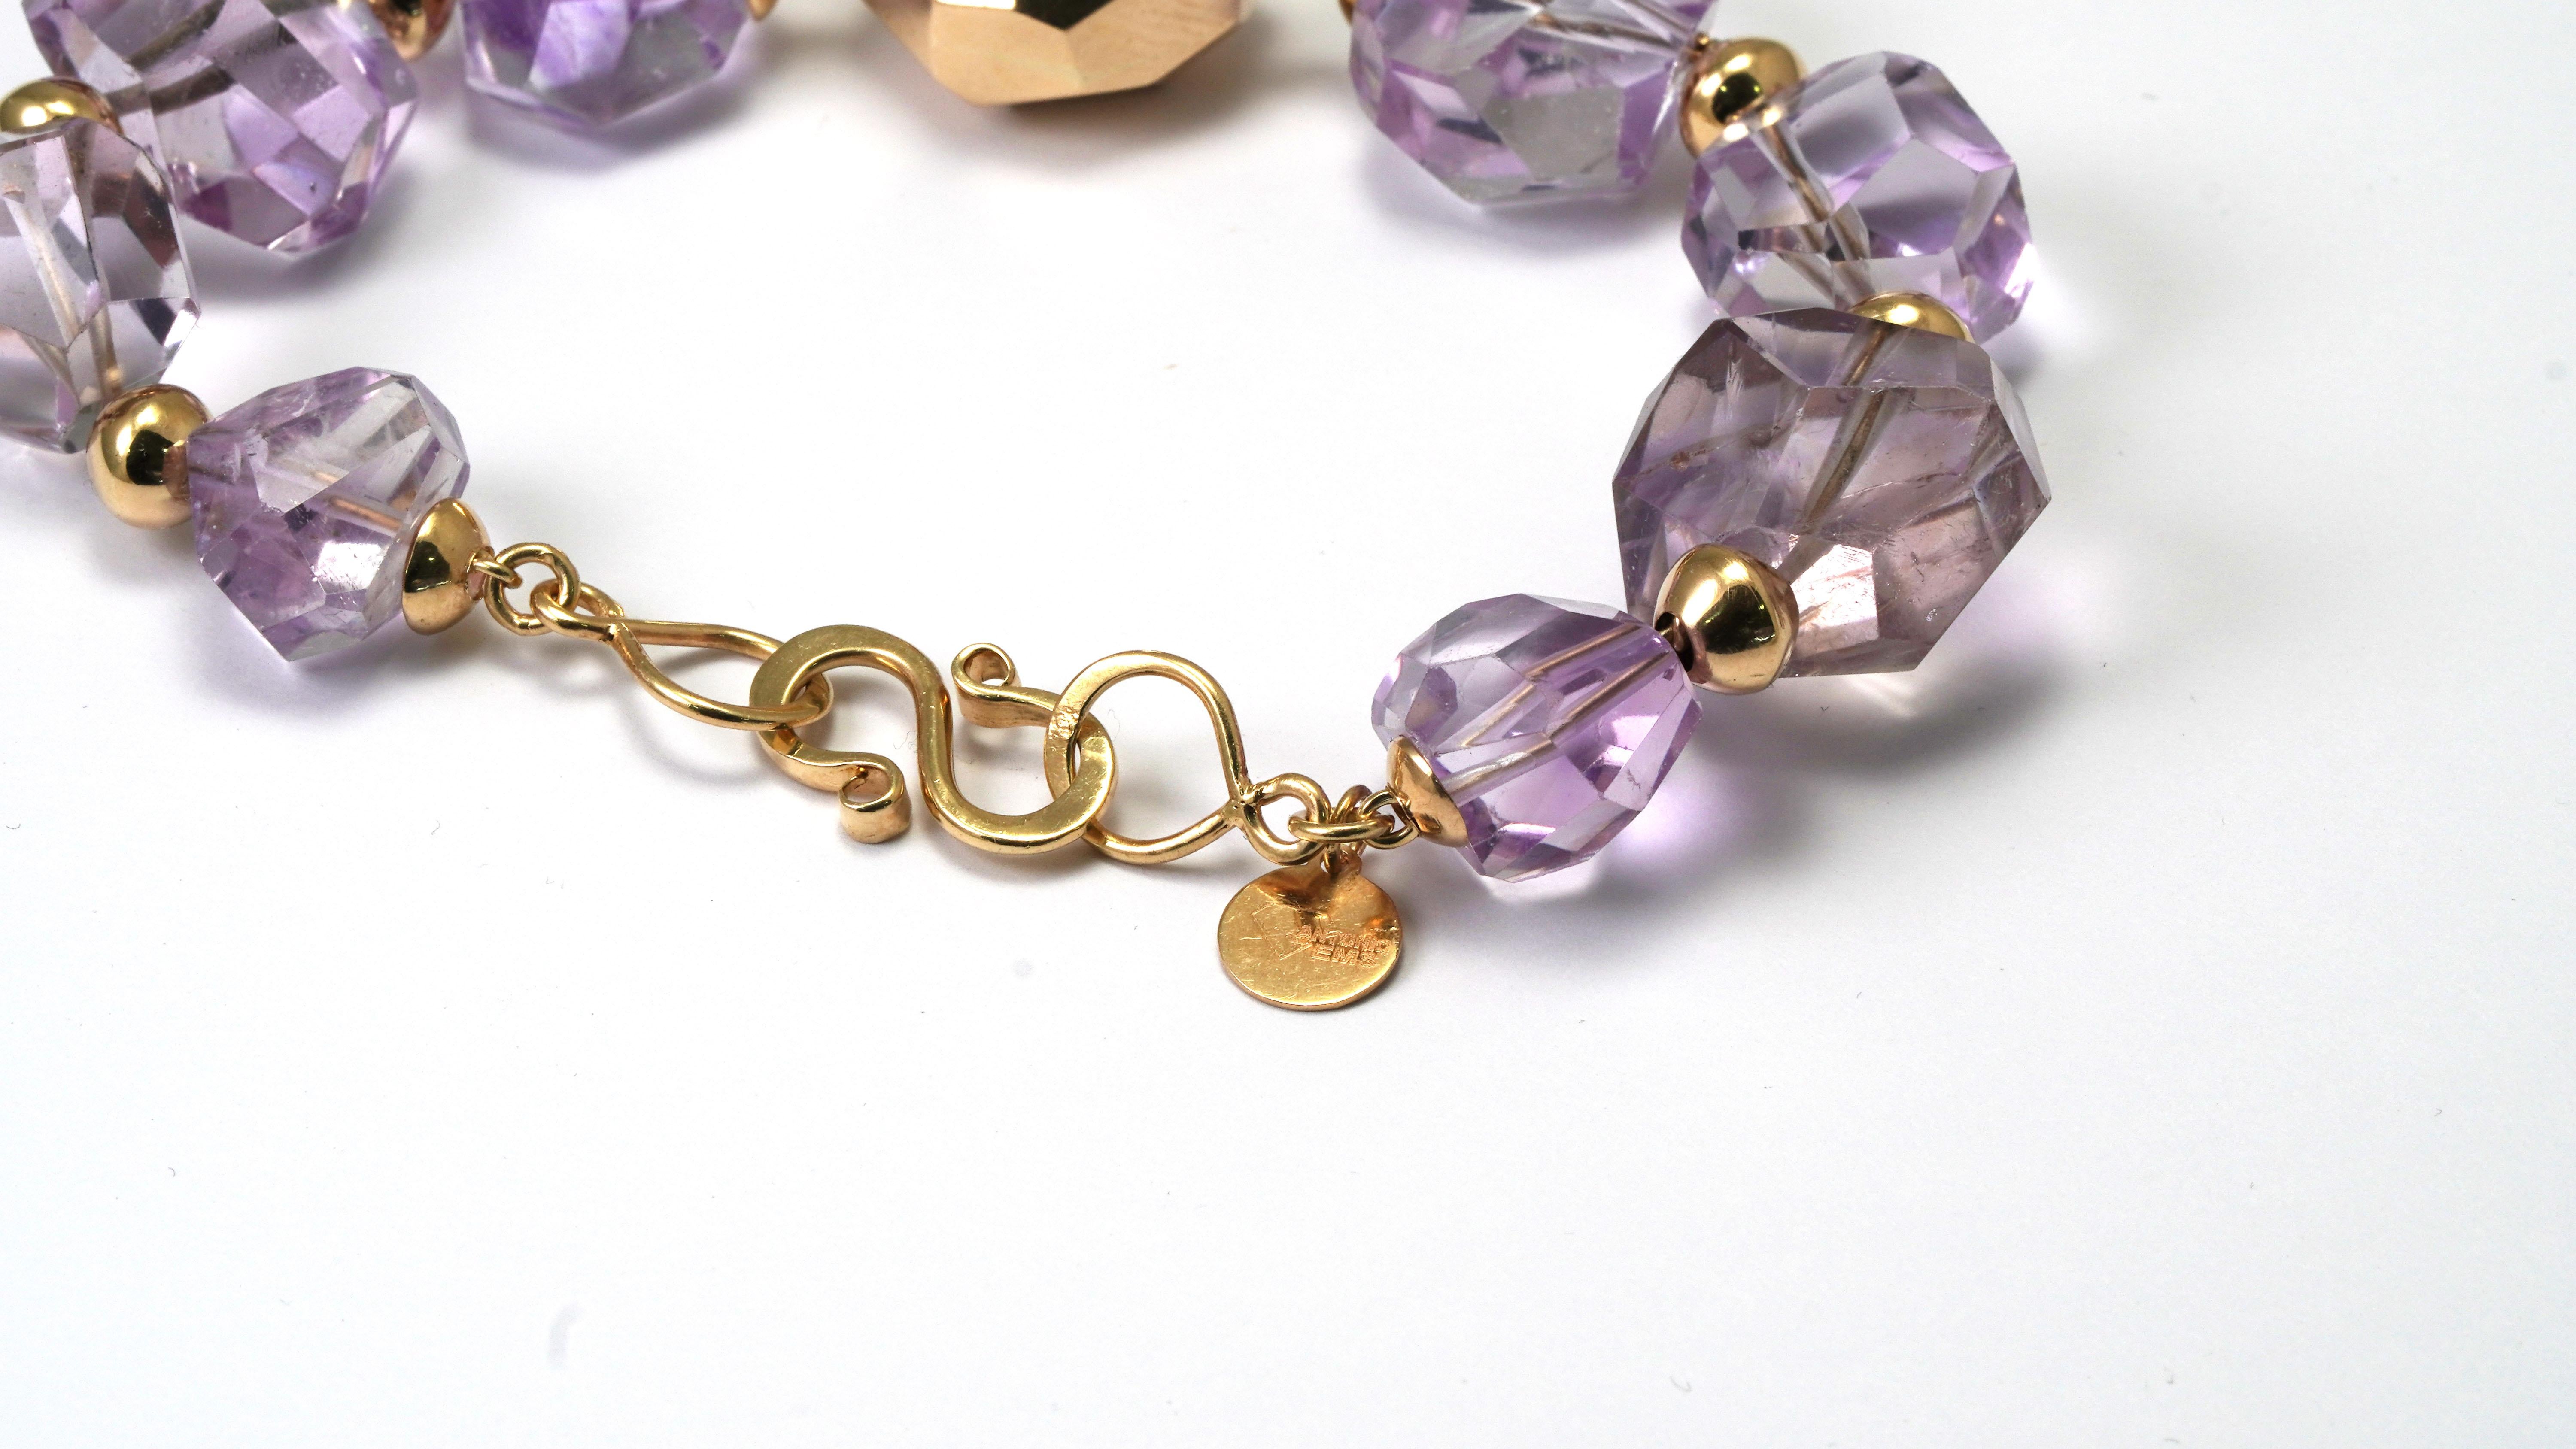 14 kt Yellow Gold Bracelet set with Amethyst.
Gold color: Yellow
Dimensions: 21 cm. (Length) but the Stones are big so
the bracelet is normal Size - Diameter 58 mm.
Total weight: 47.07 grams 

Set with:
- Amethyst
Cut: Fancy
Color: Purple